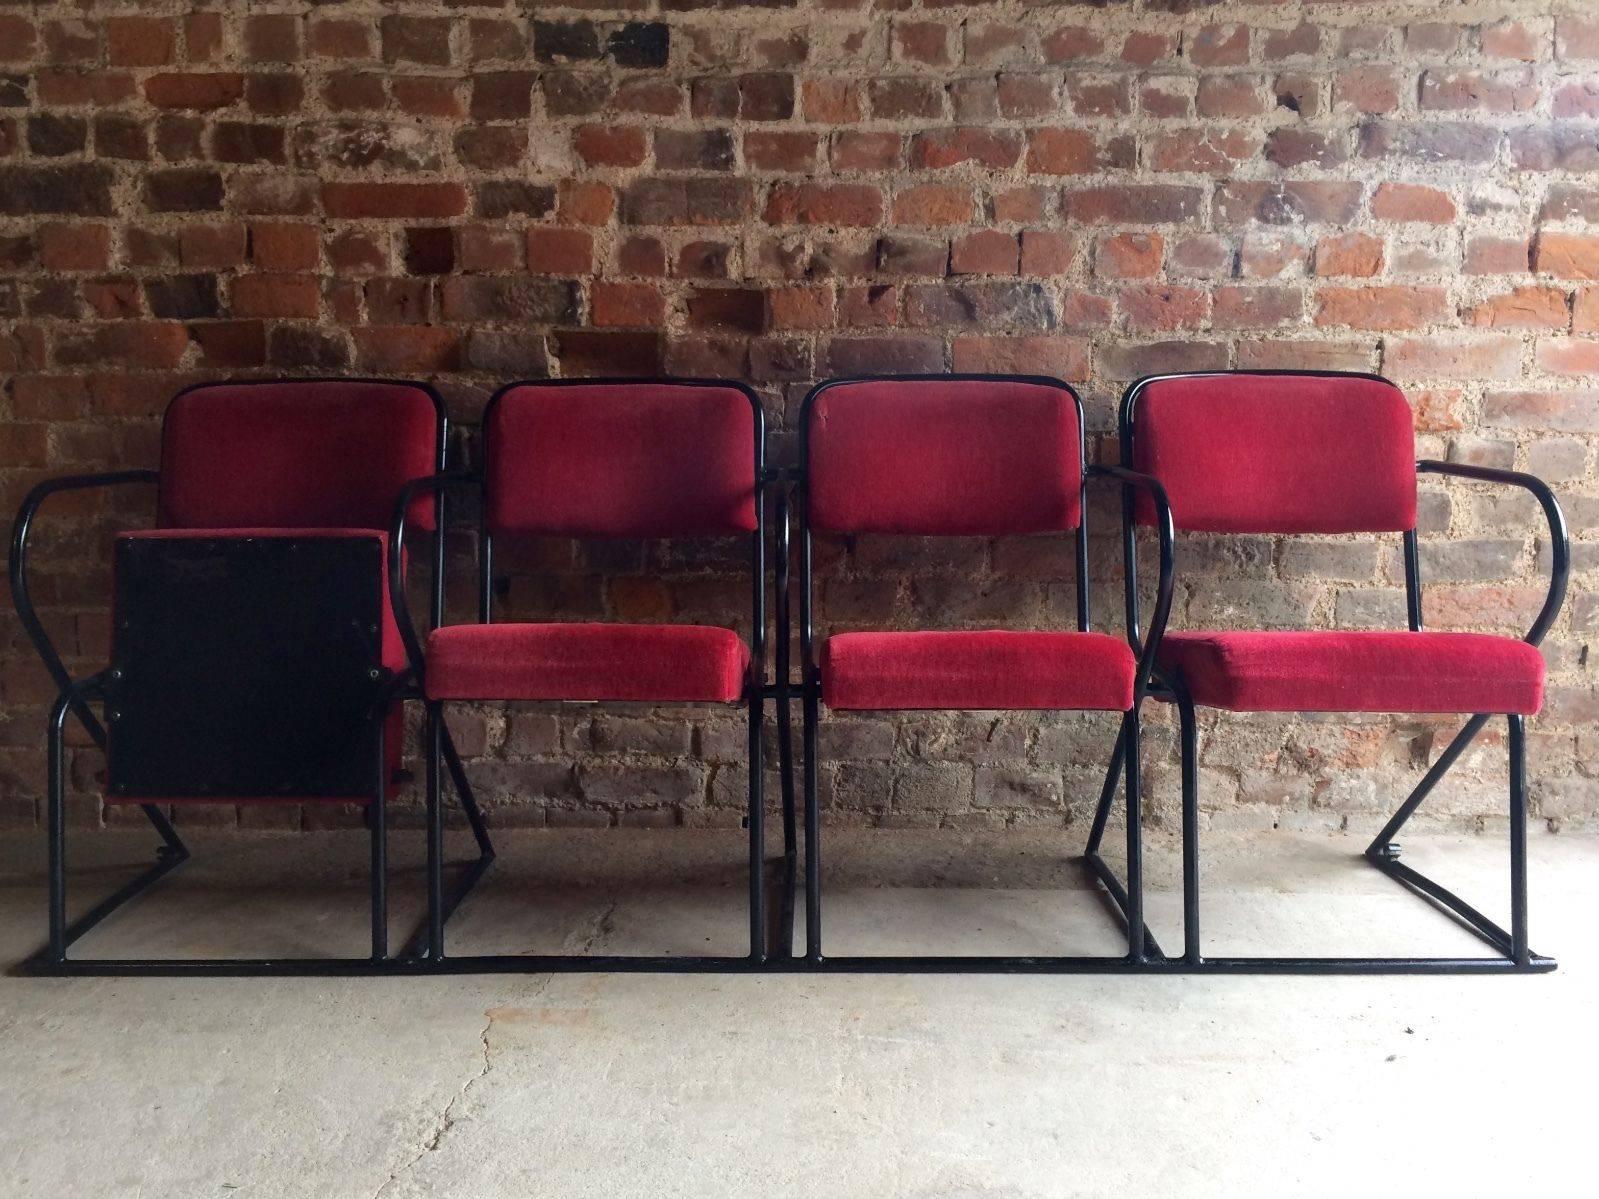 Stunning Cinema Seats Vintage Retro Mid-Century Industrial Style Bank of Four In Excellent Condition In Longdon, Tewkesbury